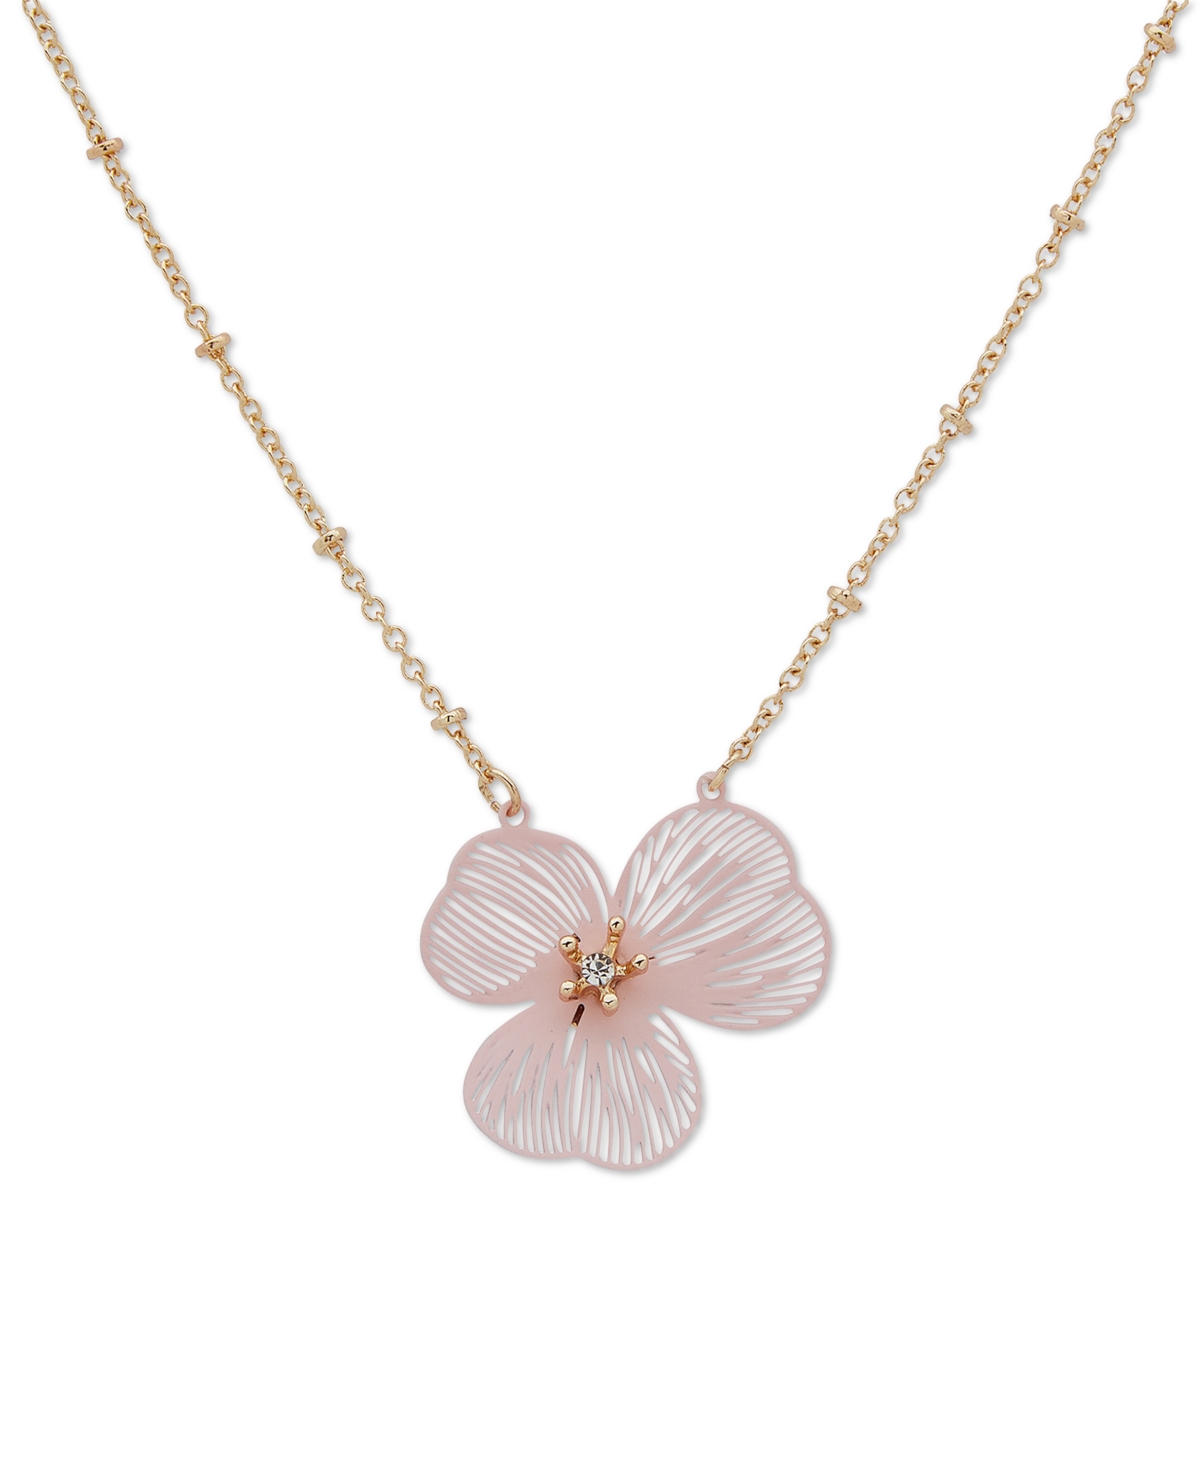 Lonna & Lilly Gold-tone Openwork Flower Pendant Necklace, 16" + 3" Extender In Pink